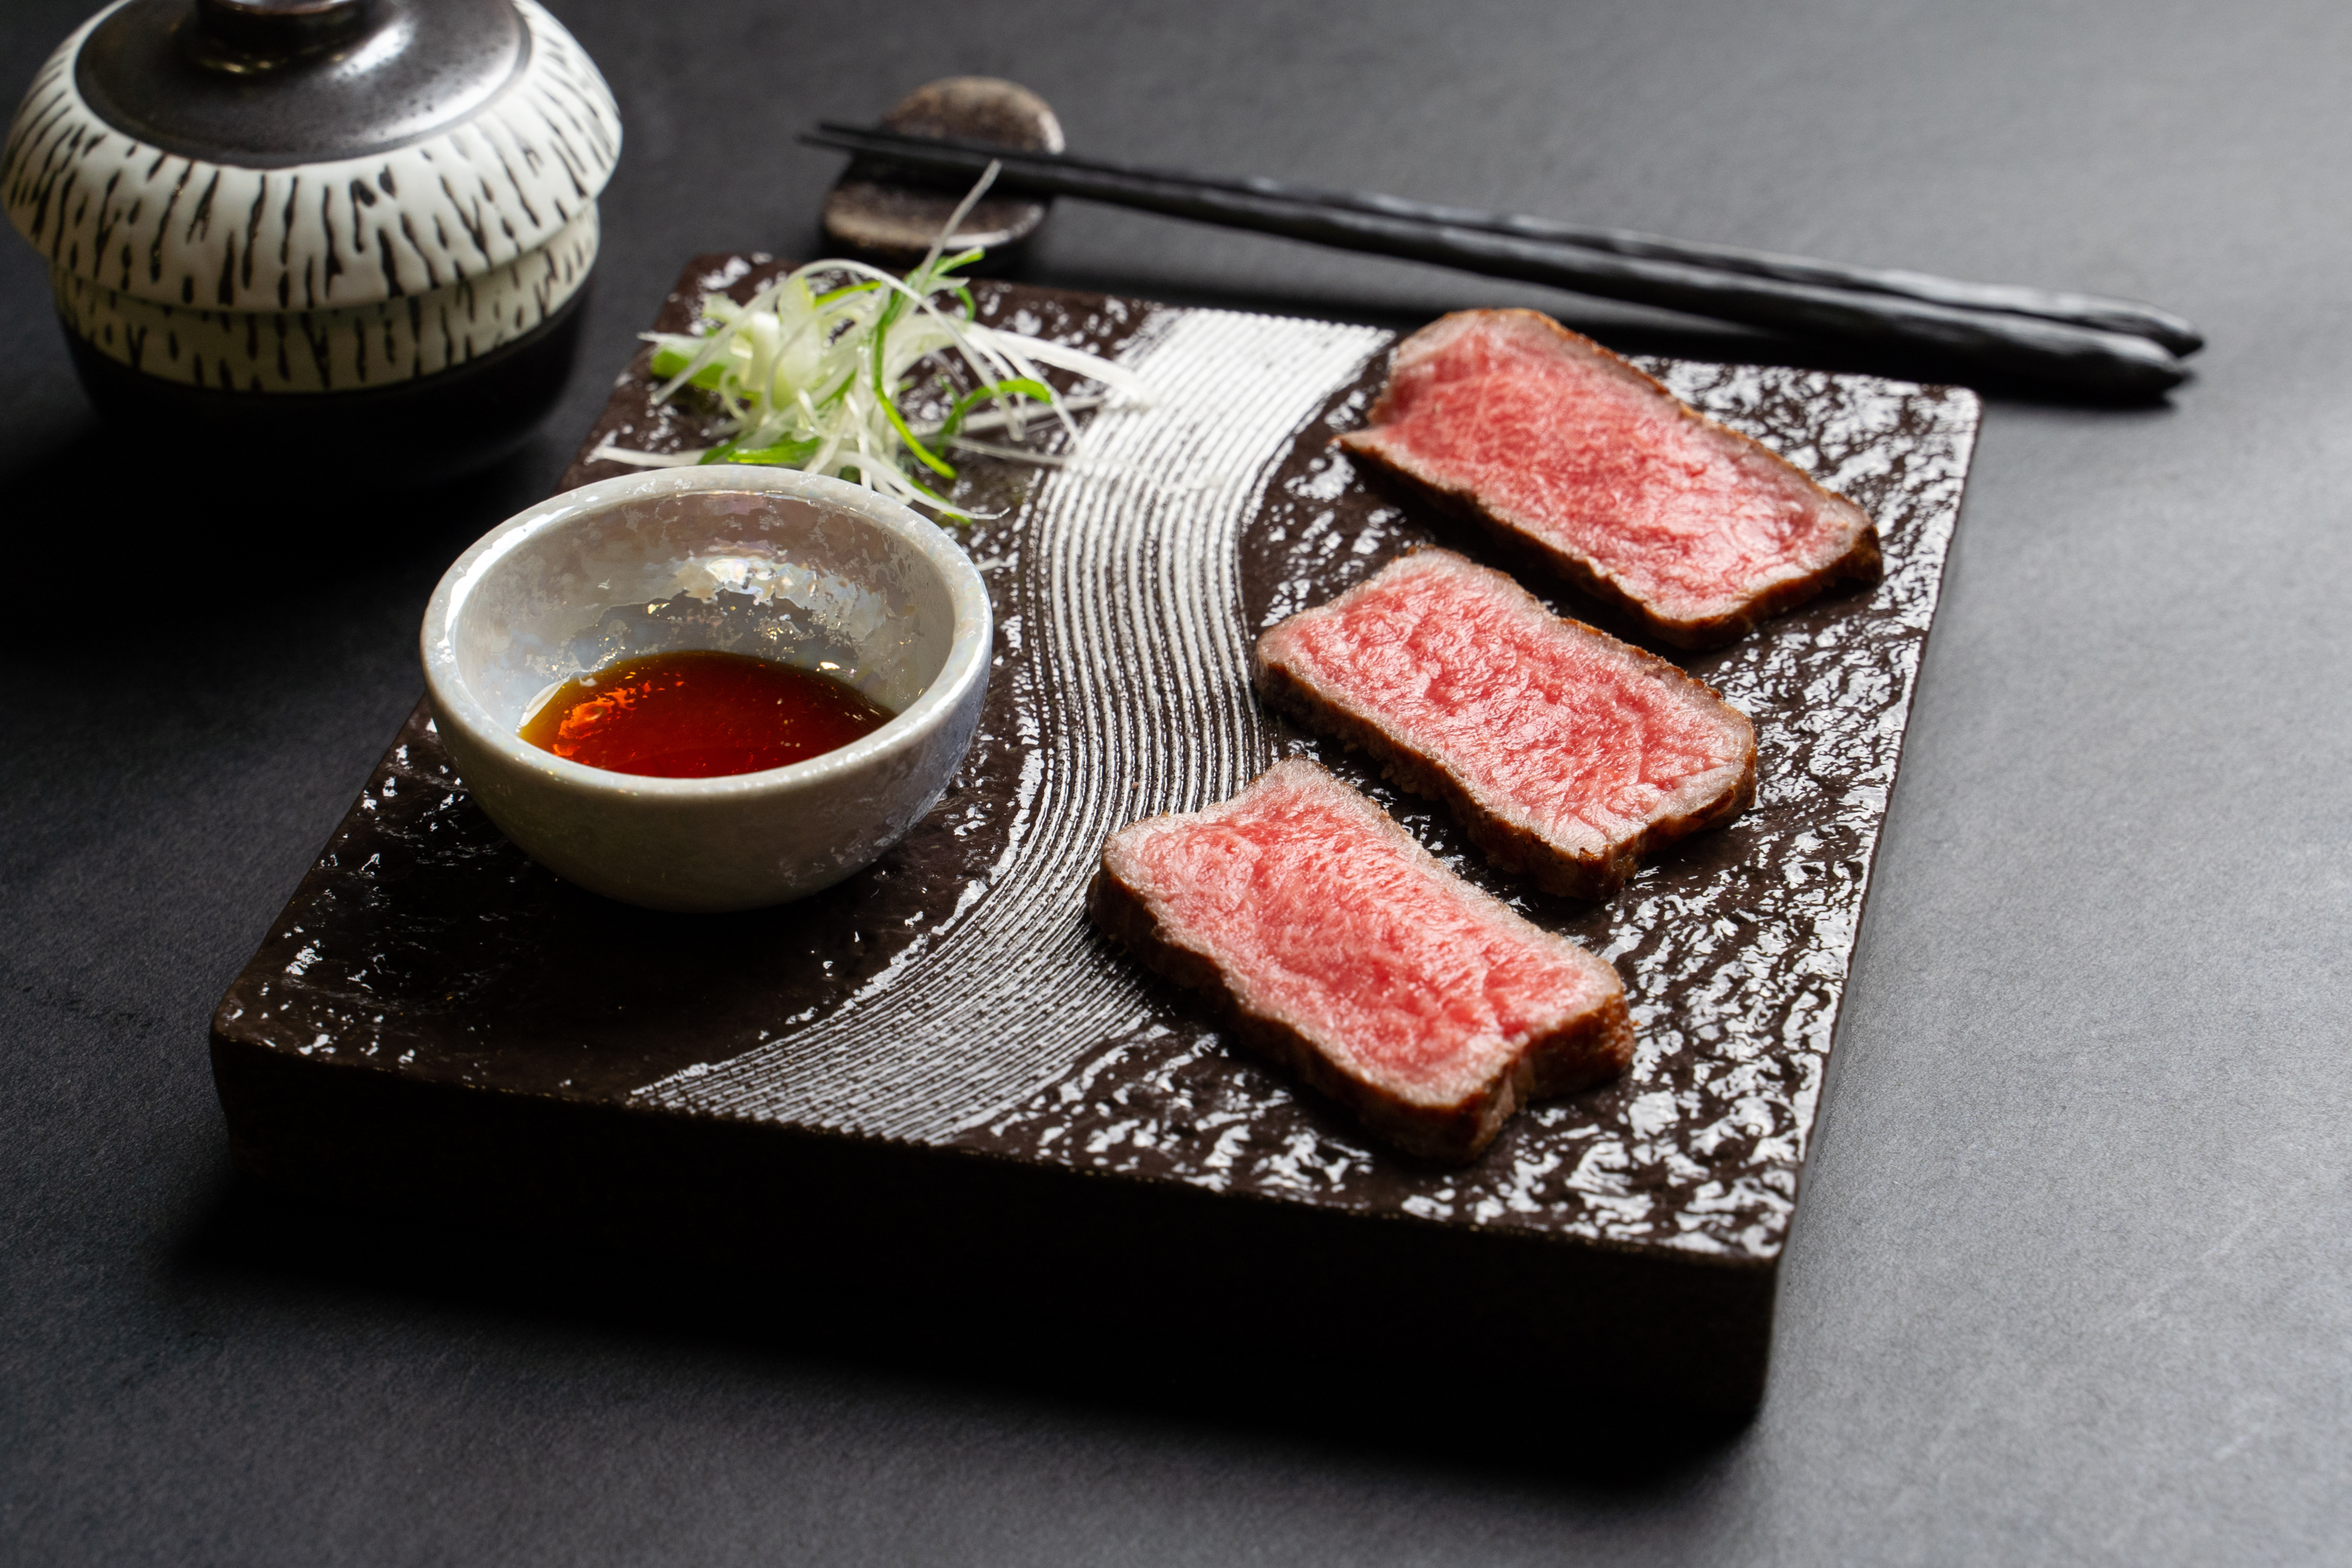 Savoring/>
<p>A5 Japanese Wagyu beef is the epitome of luxury and culinary excellence, offering an unmatched texture, and dining experience. With its intricate grading system and strict quality standards, you can be confident that your A5 Wagyu steak will be a meal to remember. Whether you're cooking at home or enjoying it at a fine restaurant, take the time to savor every tender, melt-in-your-mouth bite of this extraordinary beef.</p>